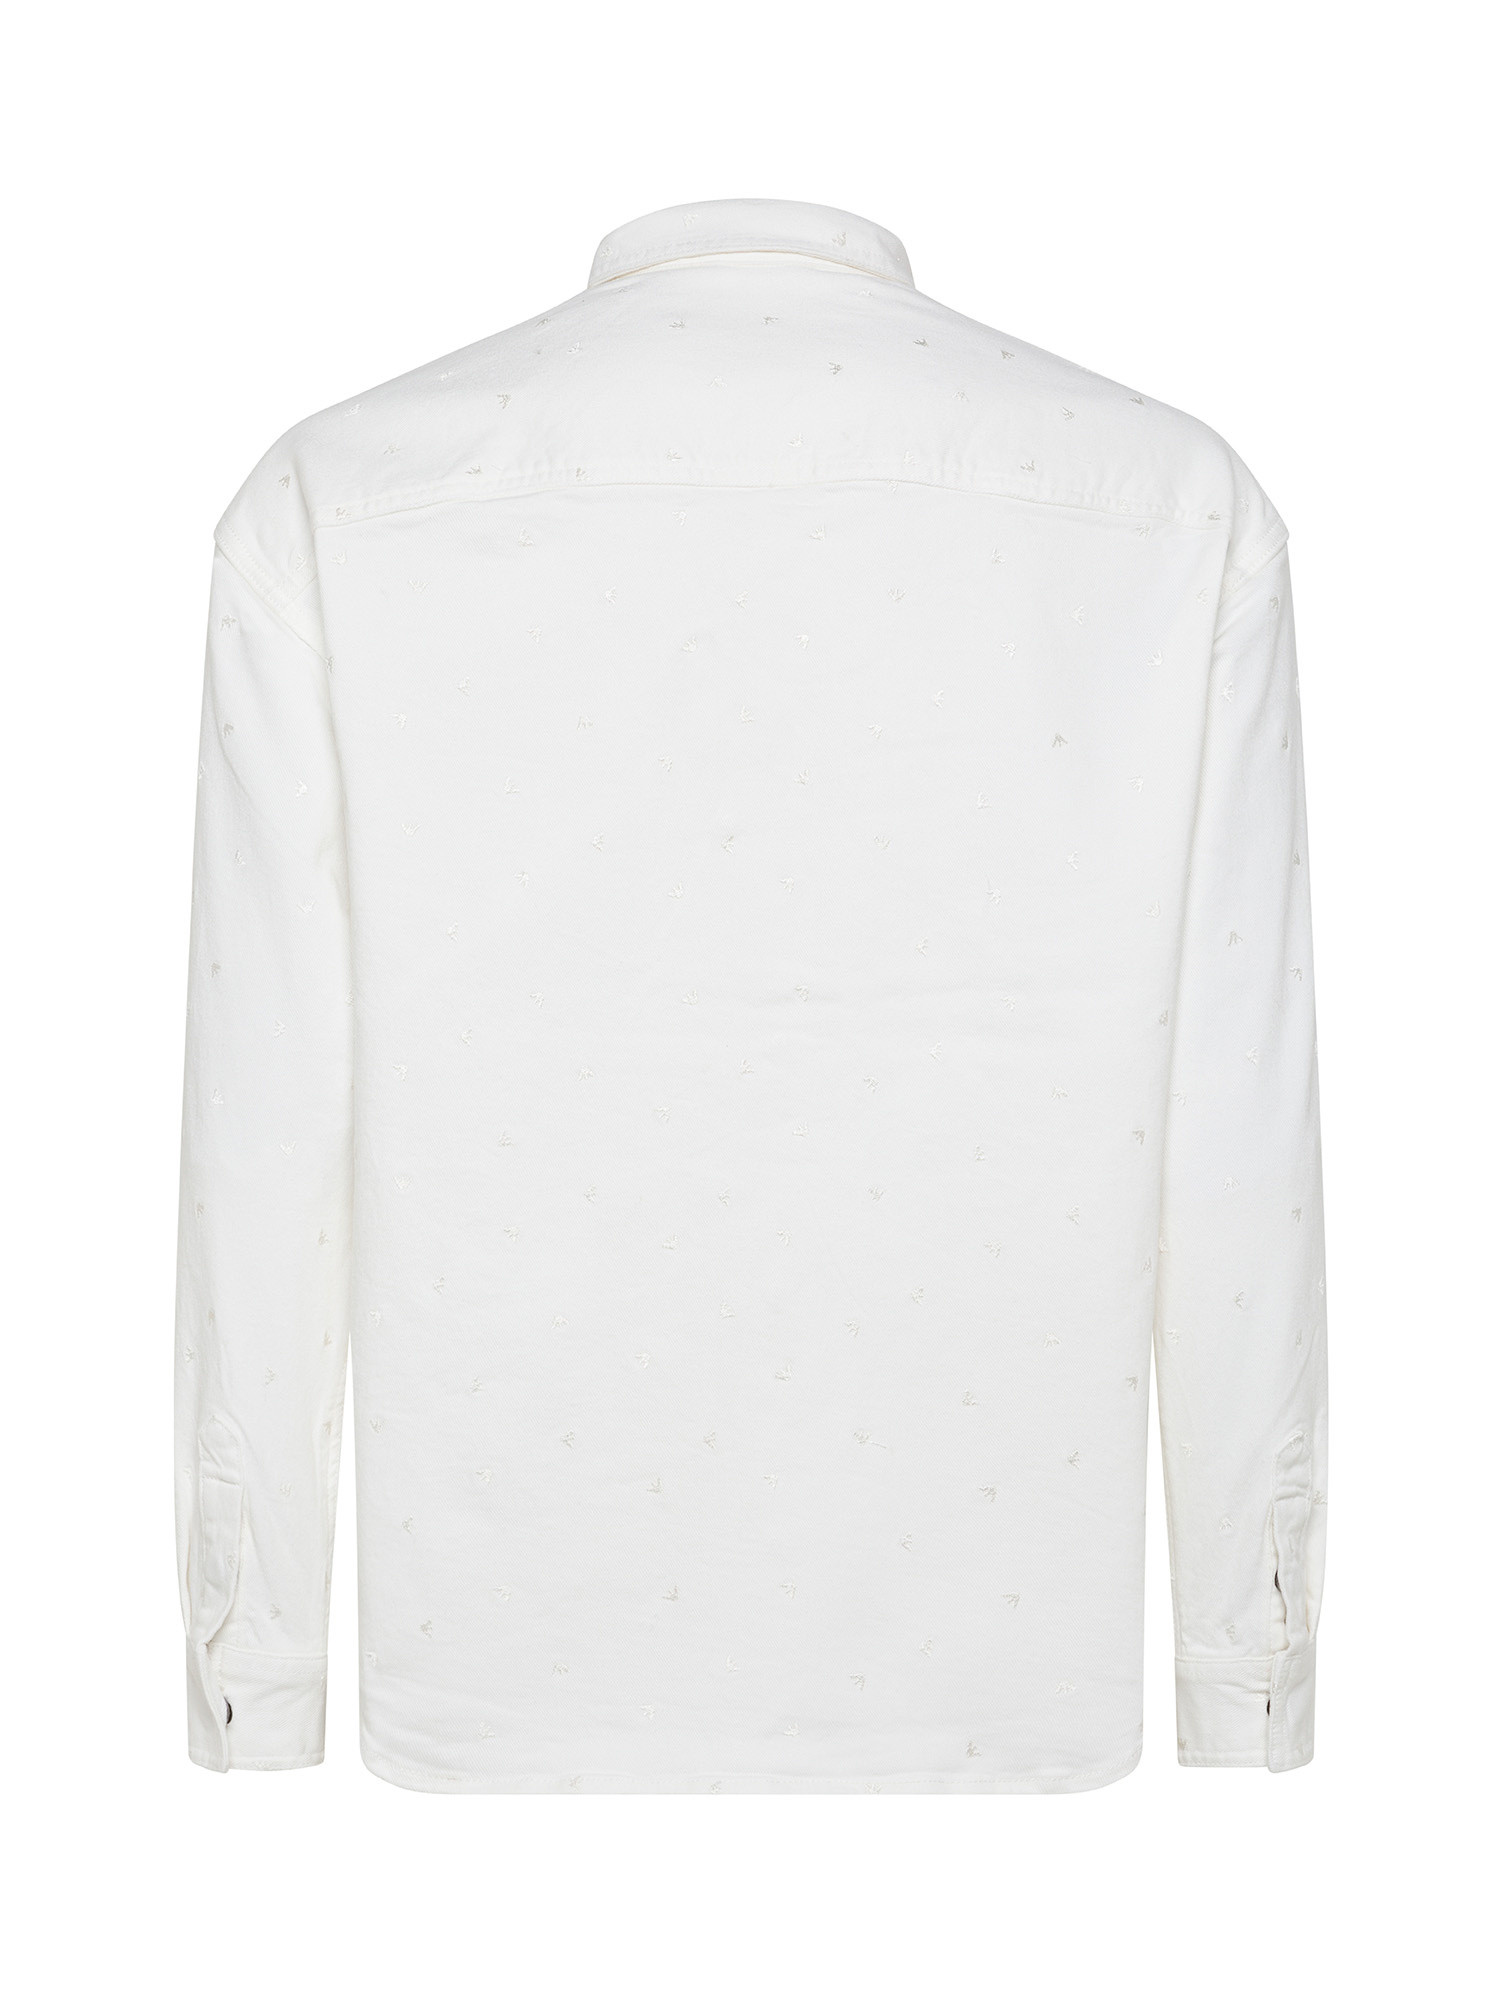 Emporio Armani - Shirt with all over micro eagle embroidery, White, large image number 1